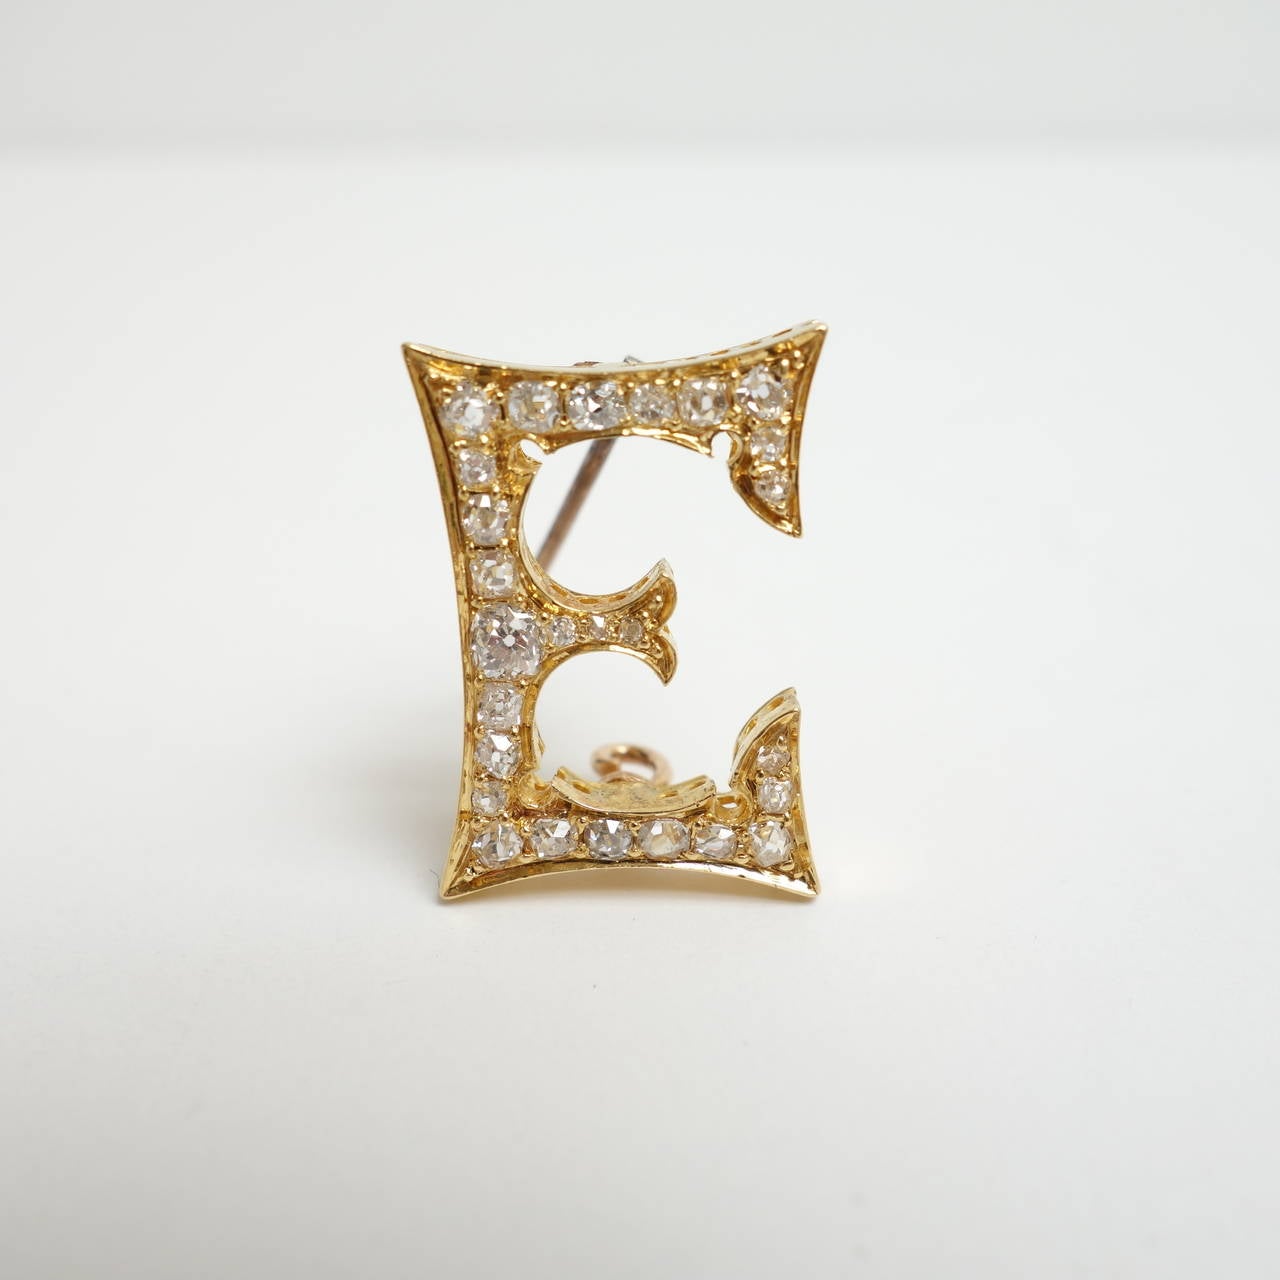 Gorgeous Victorian Diamond and Yellow Gold Initial E Pin crafted in 14K yellow gold, set with twenty-six old mine cut diamonds, approx. total weight of 1.00 ct.
Clarity: VS1-VS2, Color: H-I. The pin on the back is screwed on, and can be easily